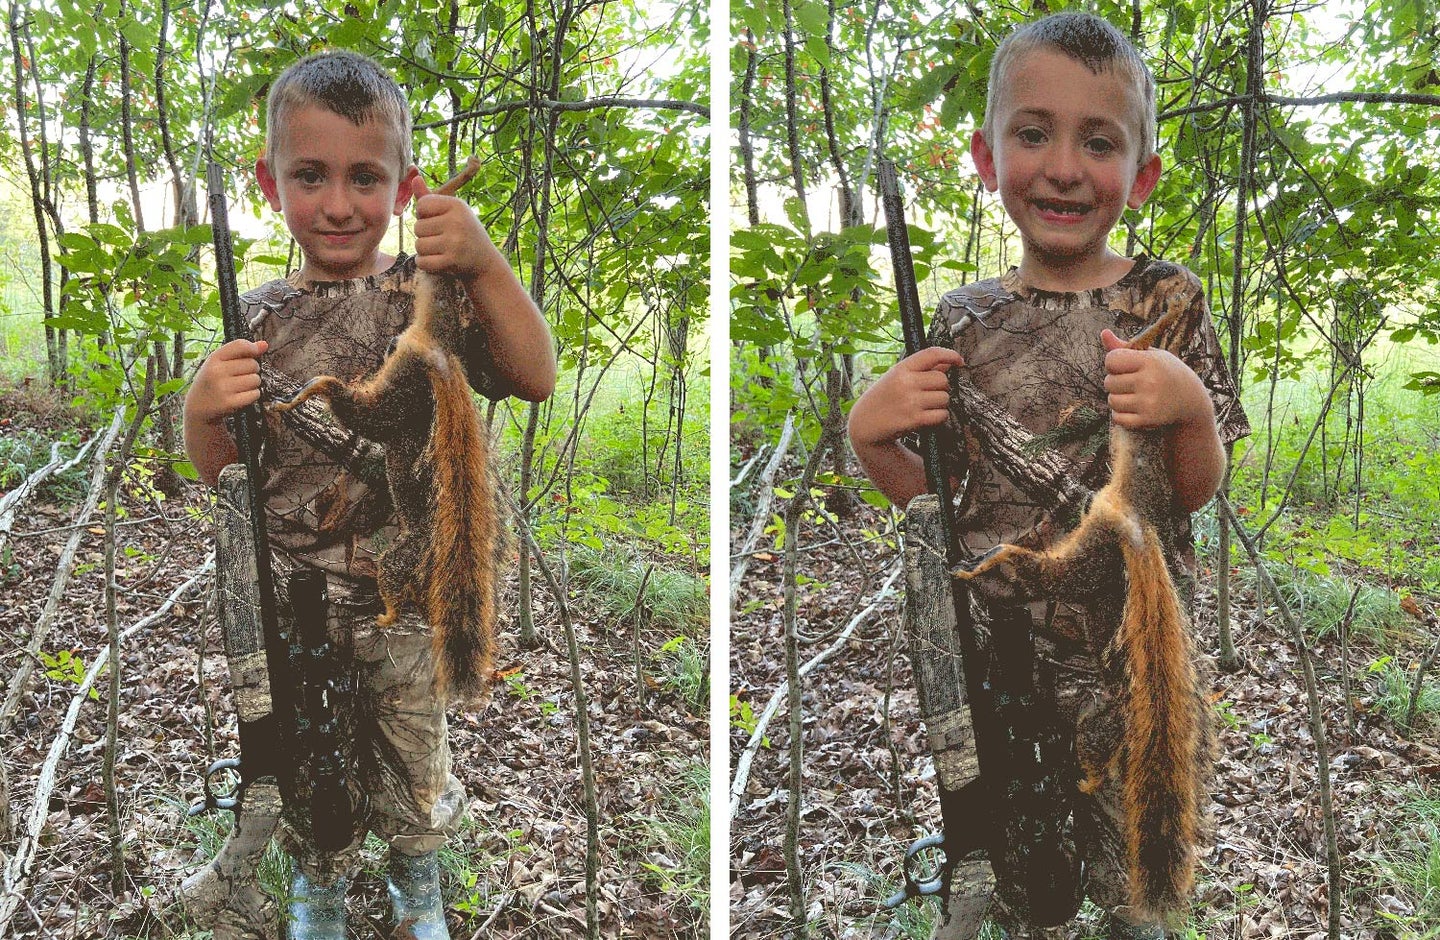 A small child holding up a squirrel in the woods.